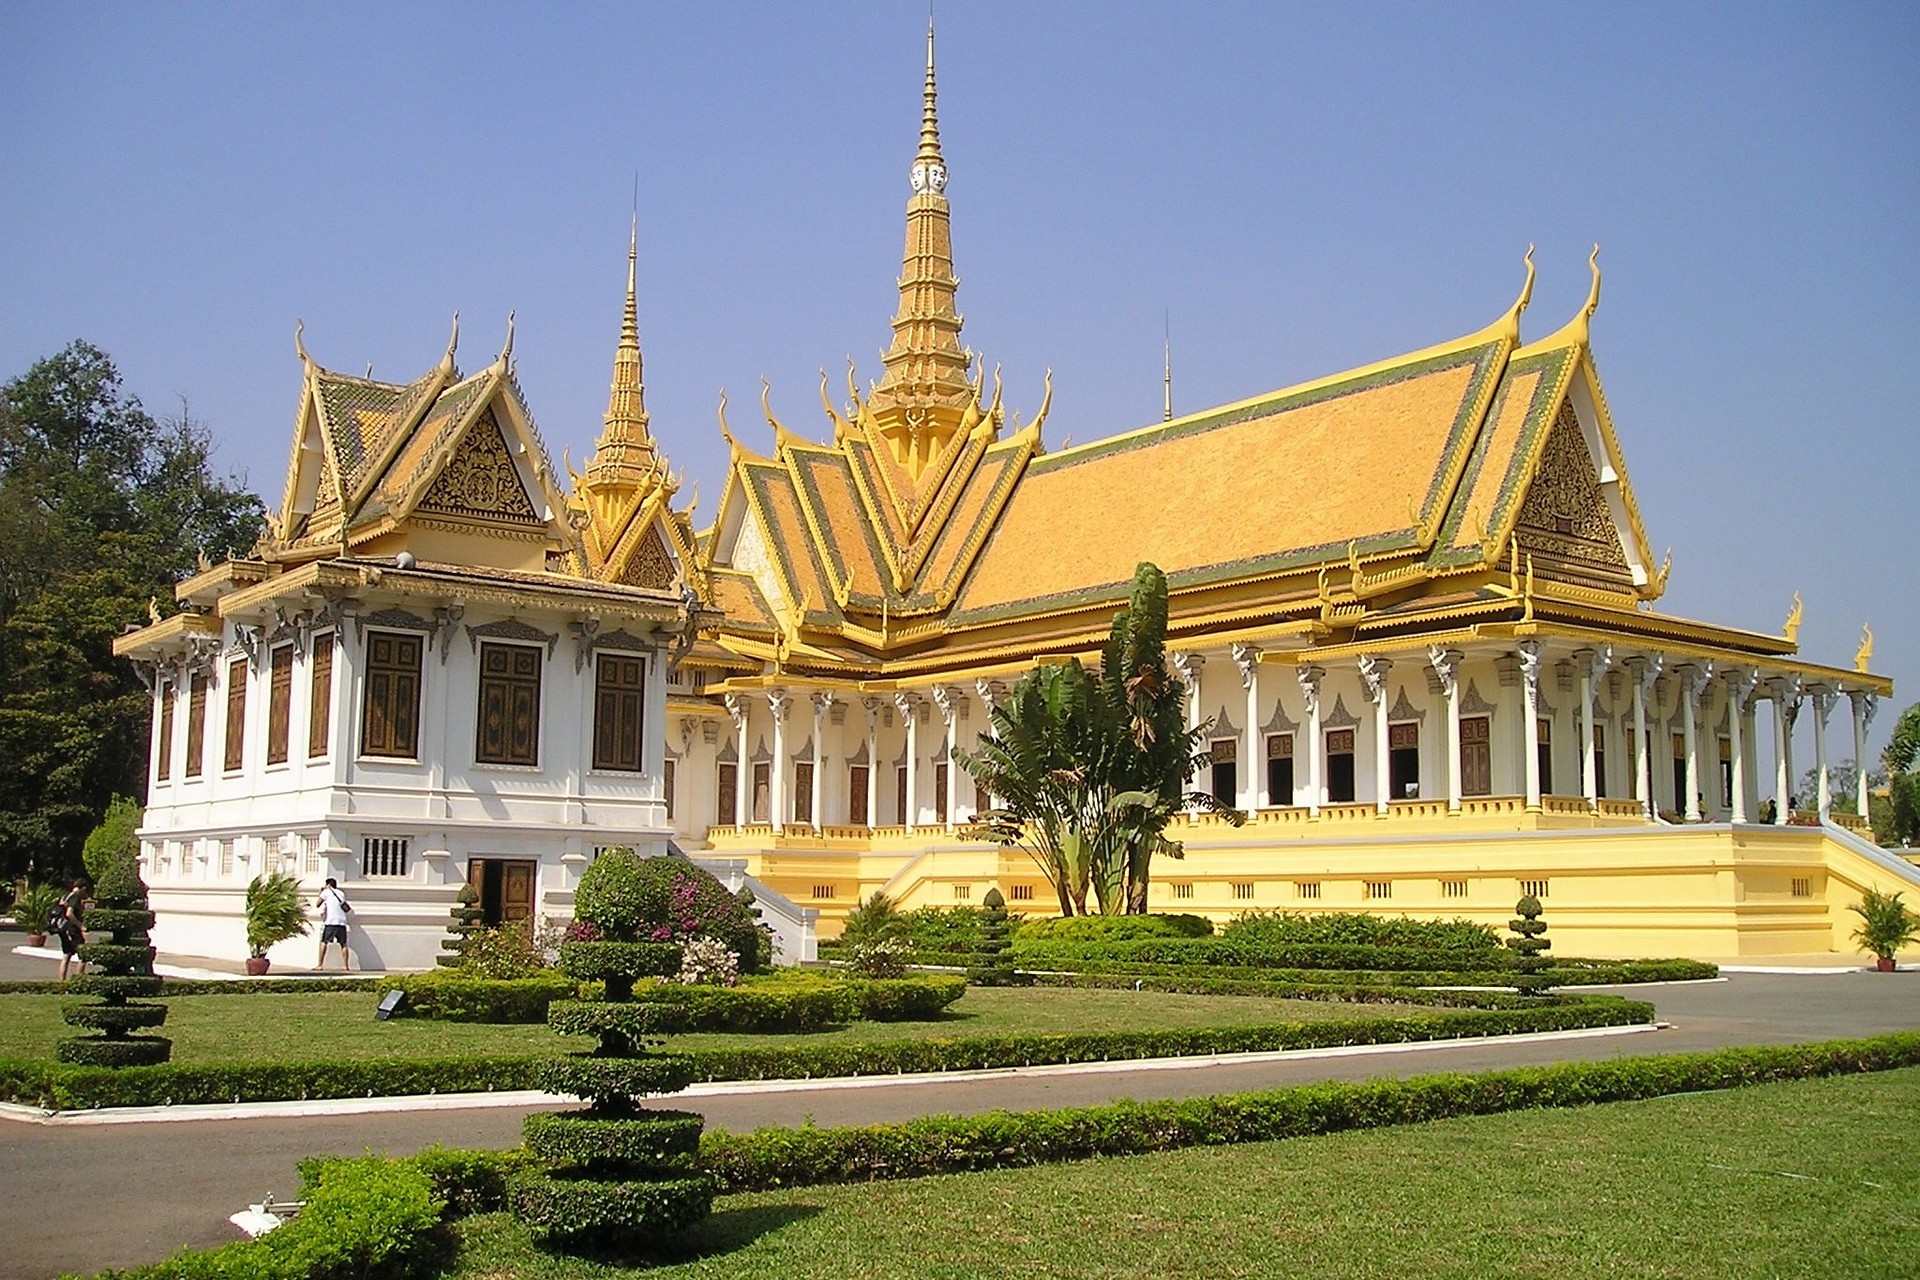 The Grand Royal Palace in Cambodia